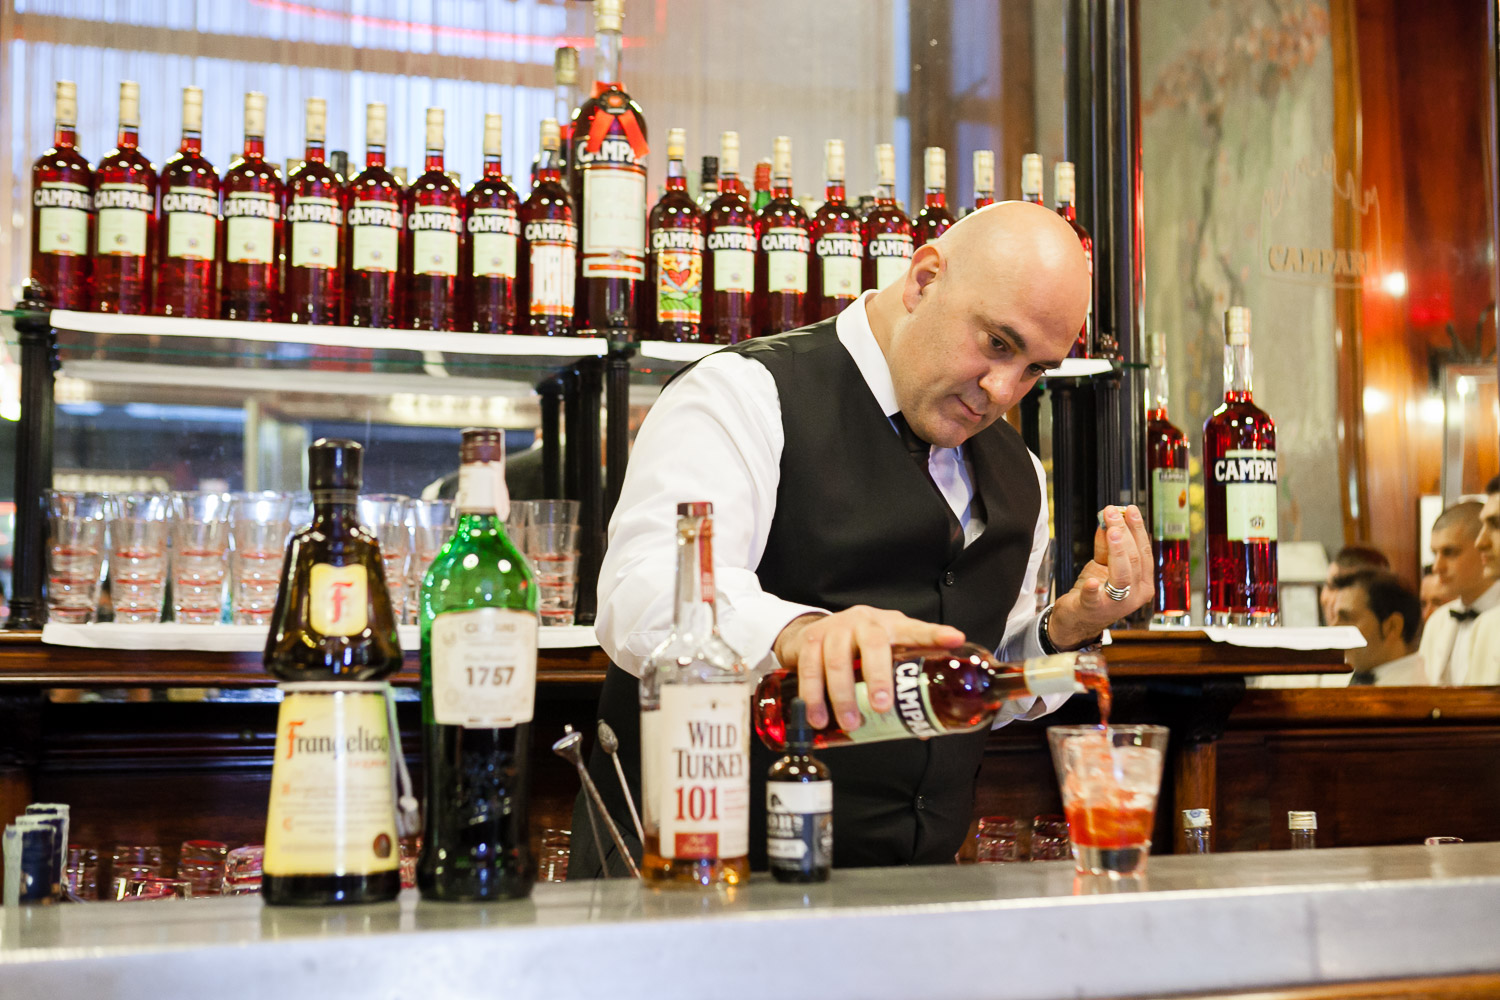 Get Your Negroni Fix With Renowned Bavarian Guest Bartender Mauro Mahjoub at Atmosphere, Sep 26-30